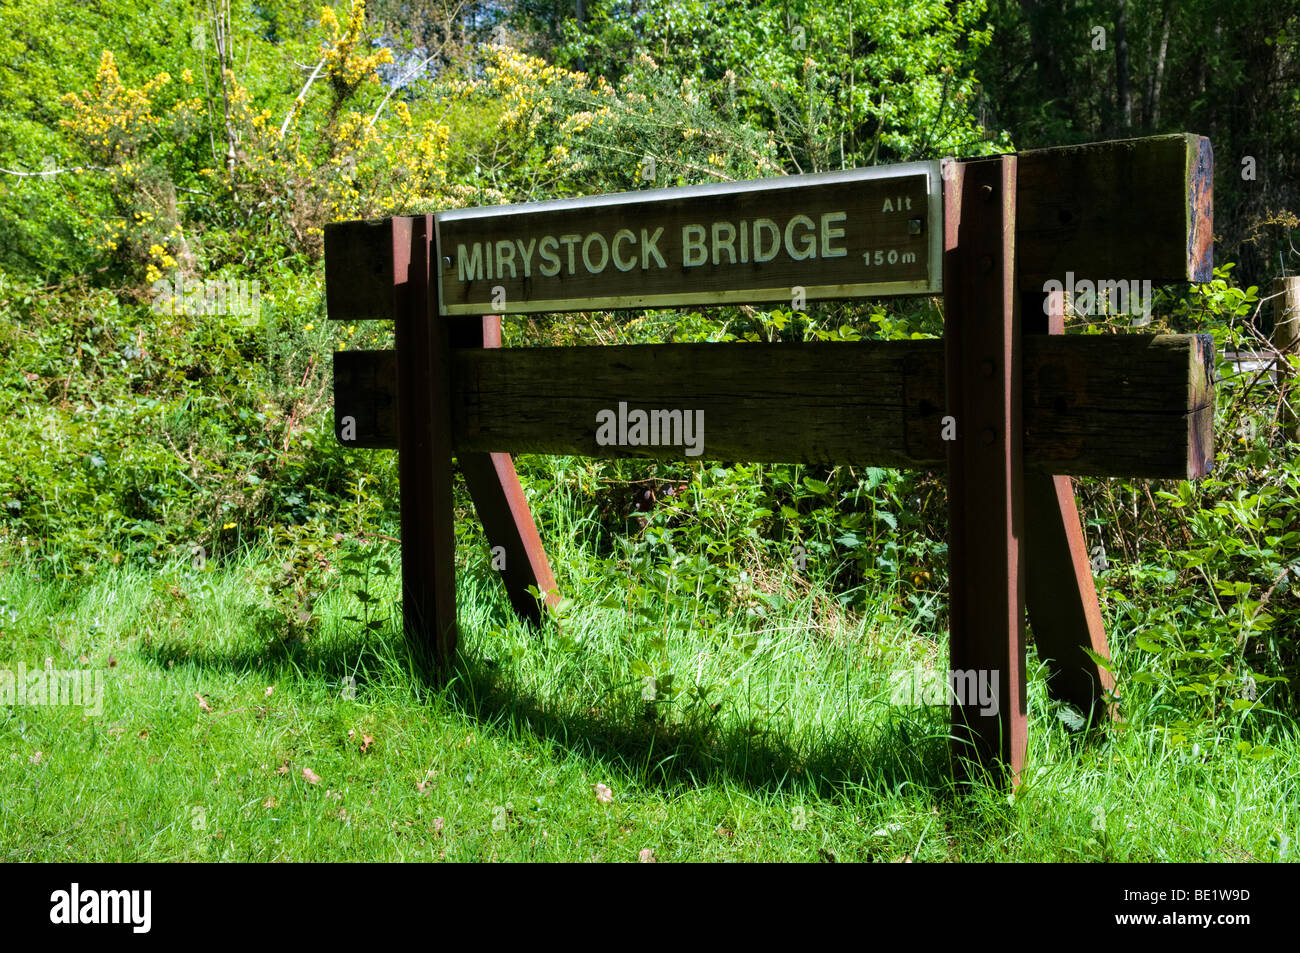 Mirystock Bridge wooden sign along footpath in Forest of Dean, Gloucestershire in Spring with lush green foliage Stock Photo